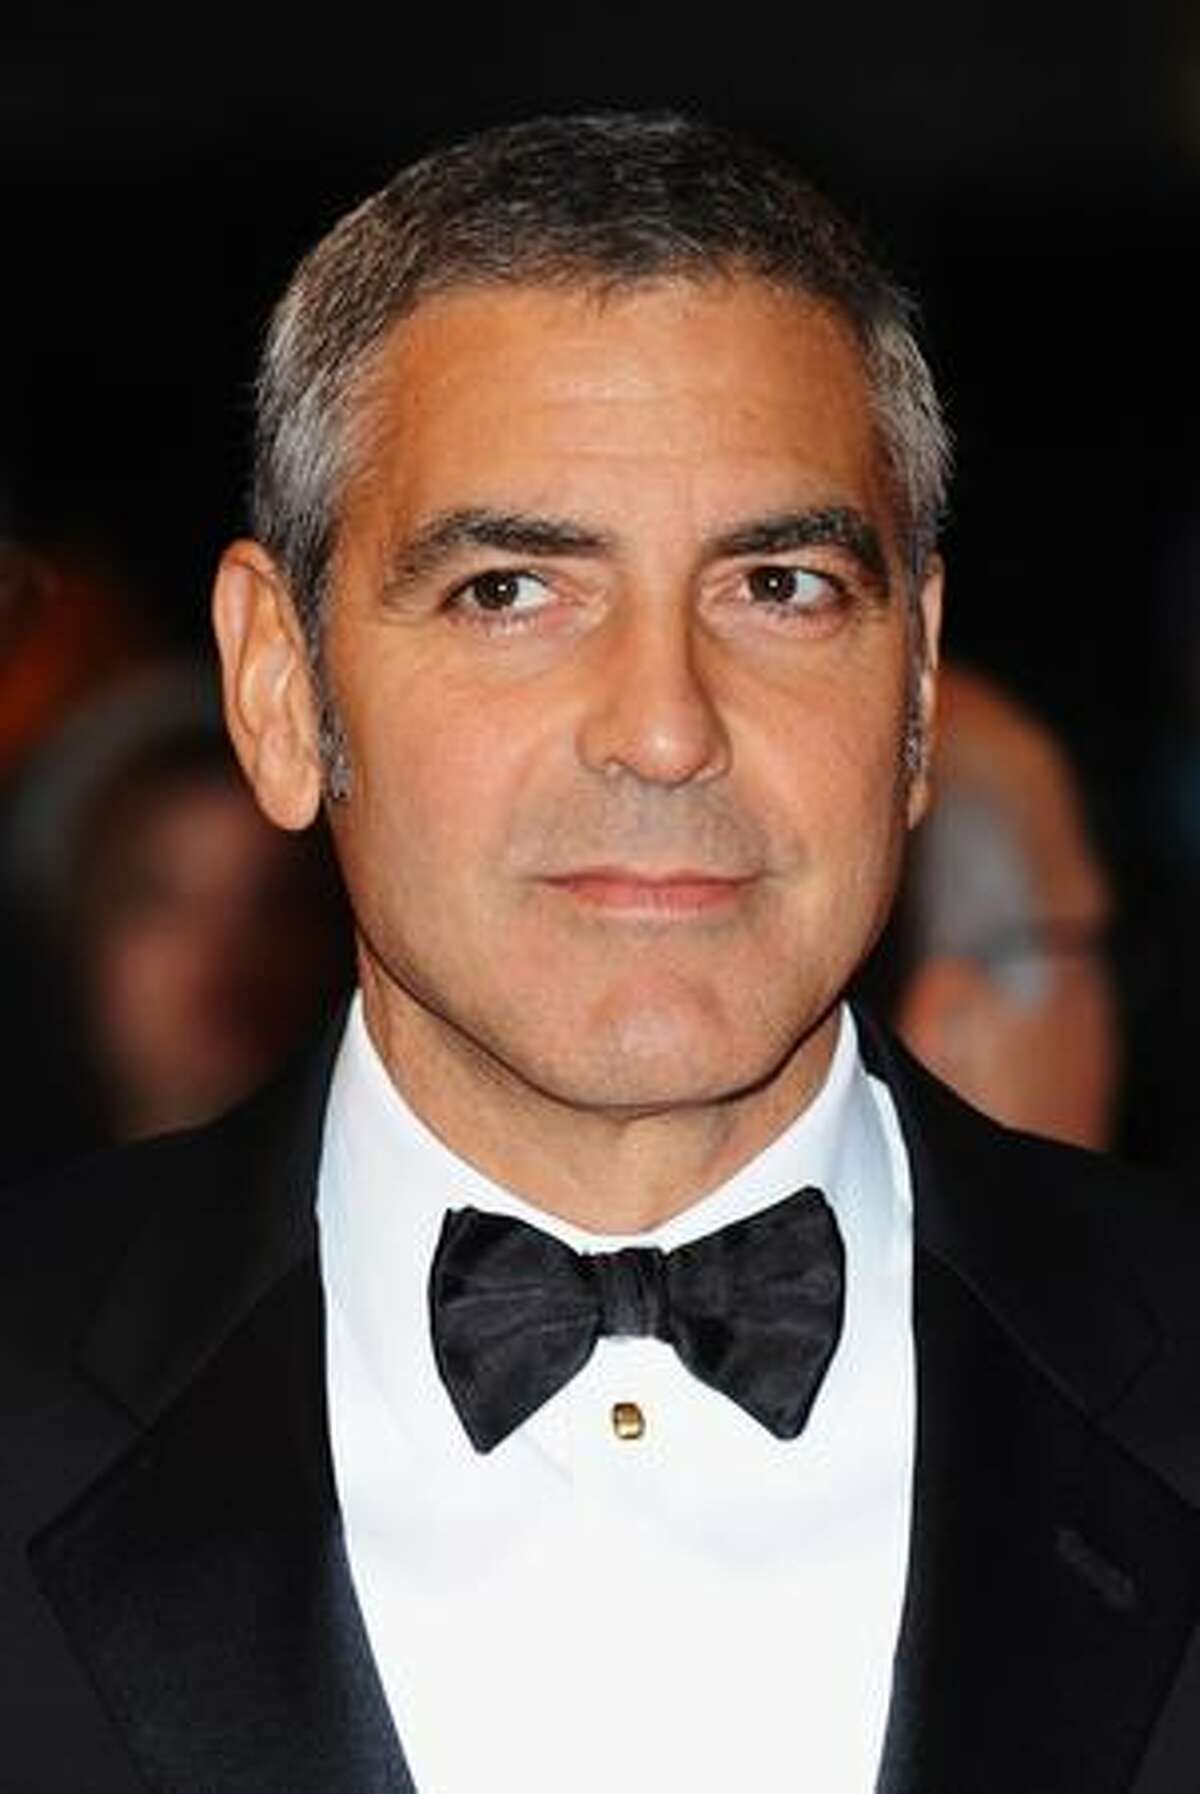 Actor George Clooney attends the world premiere of 'Fantastic Mr. Fox' and the opening gala of the Times BFI London Film Festival at the Odeon Leicester Square in London, England.